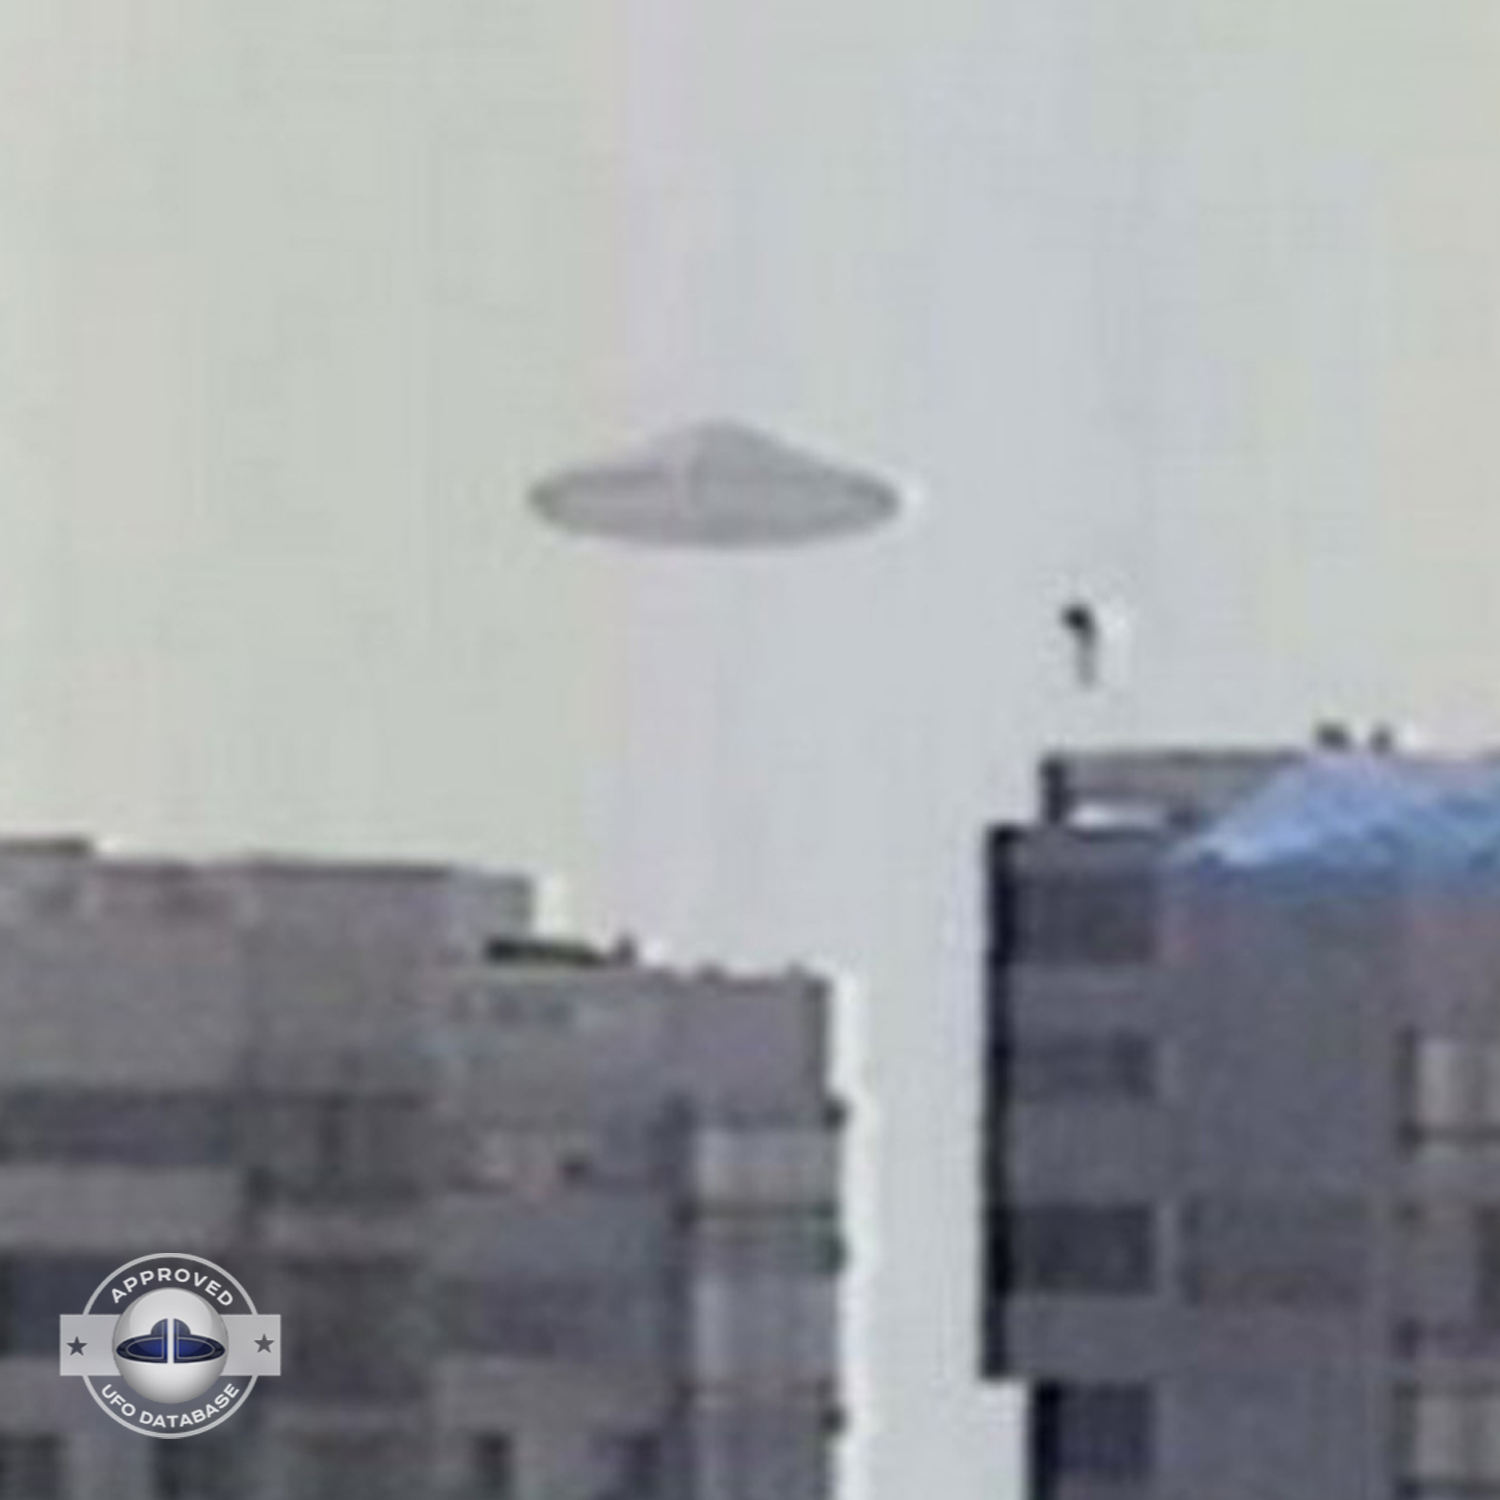 Mexico city August 6 1997 UFO Pictures from famous video (UFOdB.com) UFO Picture #55-3